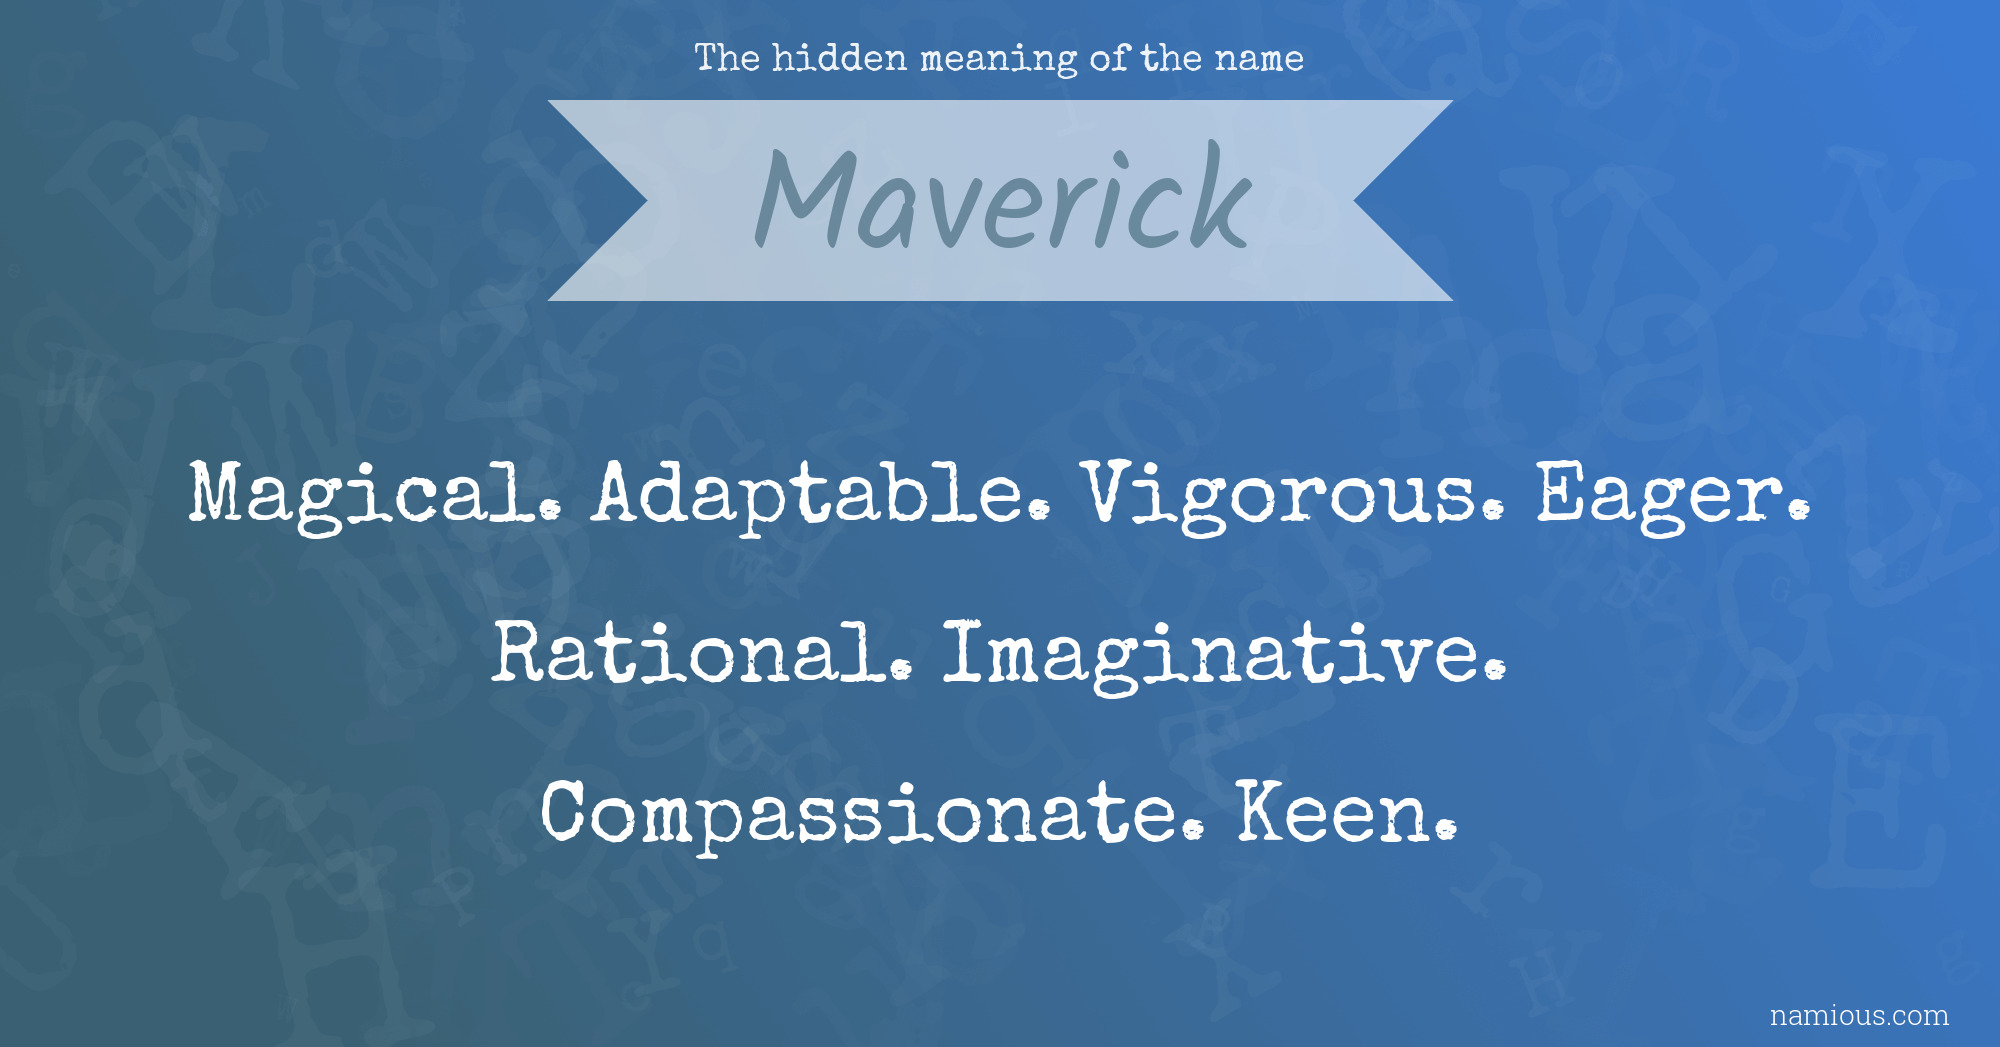 The hidden meaning of the name Maverick